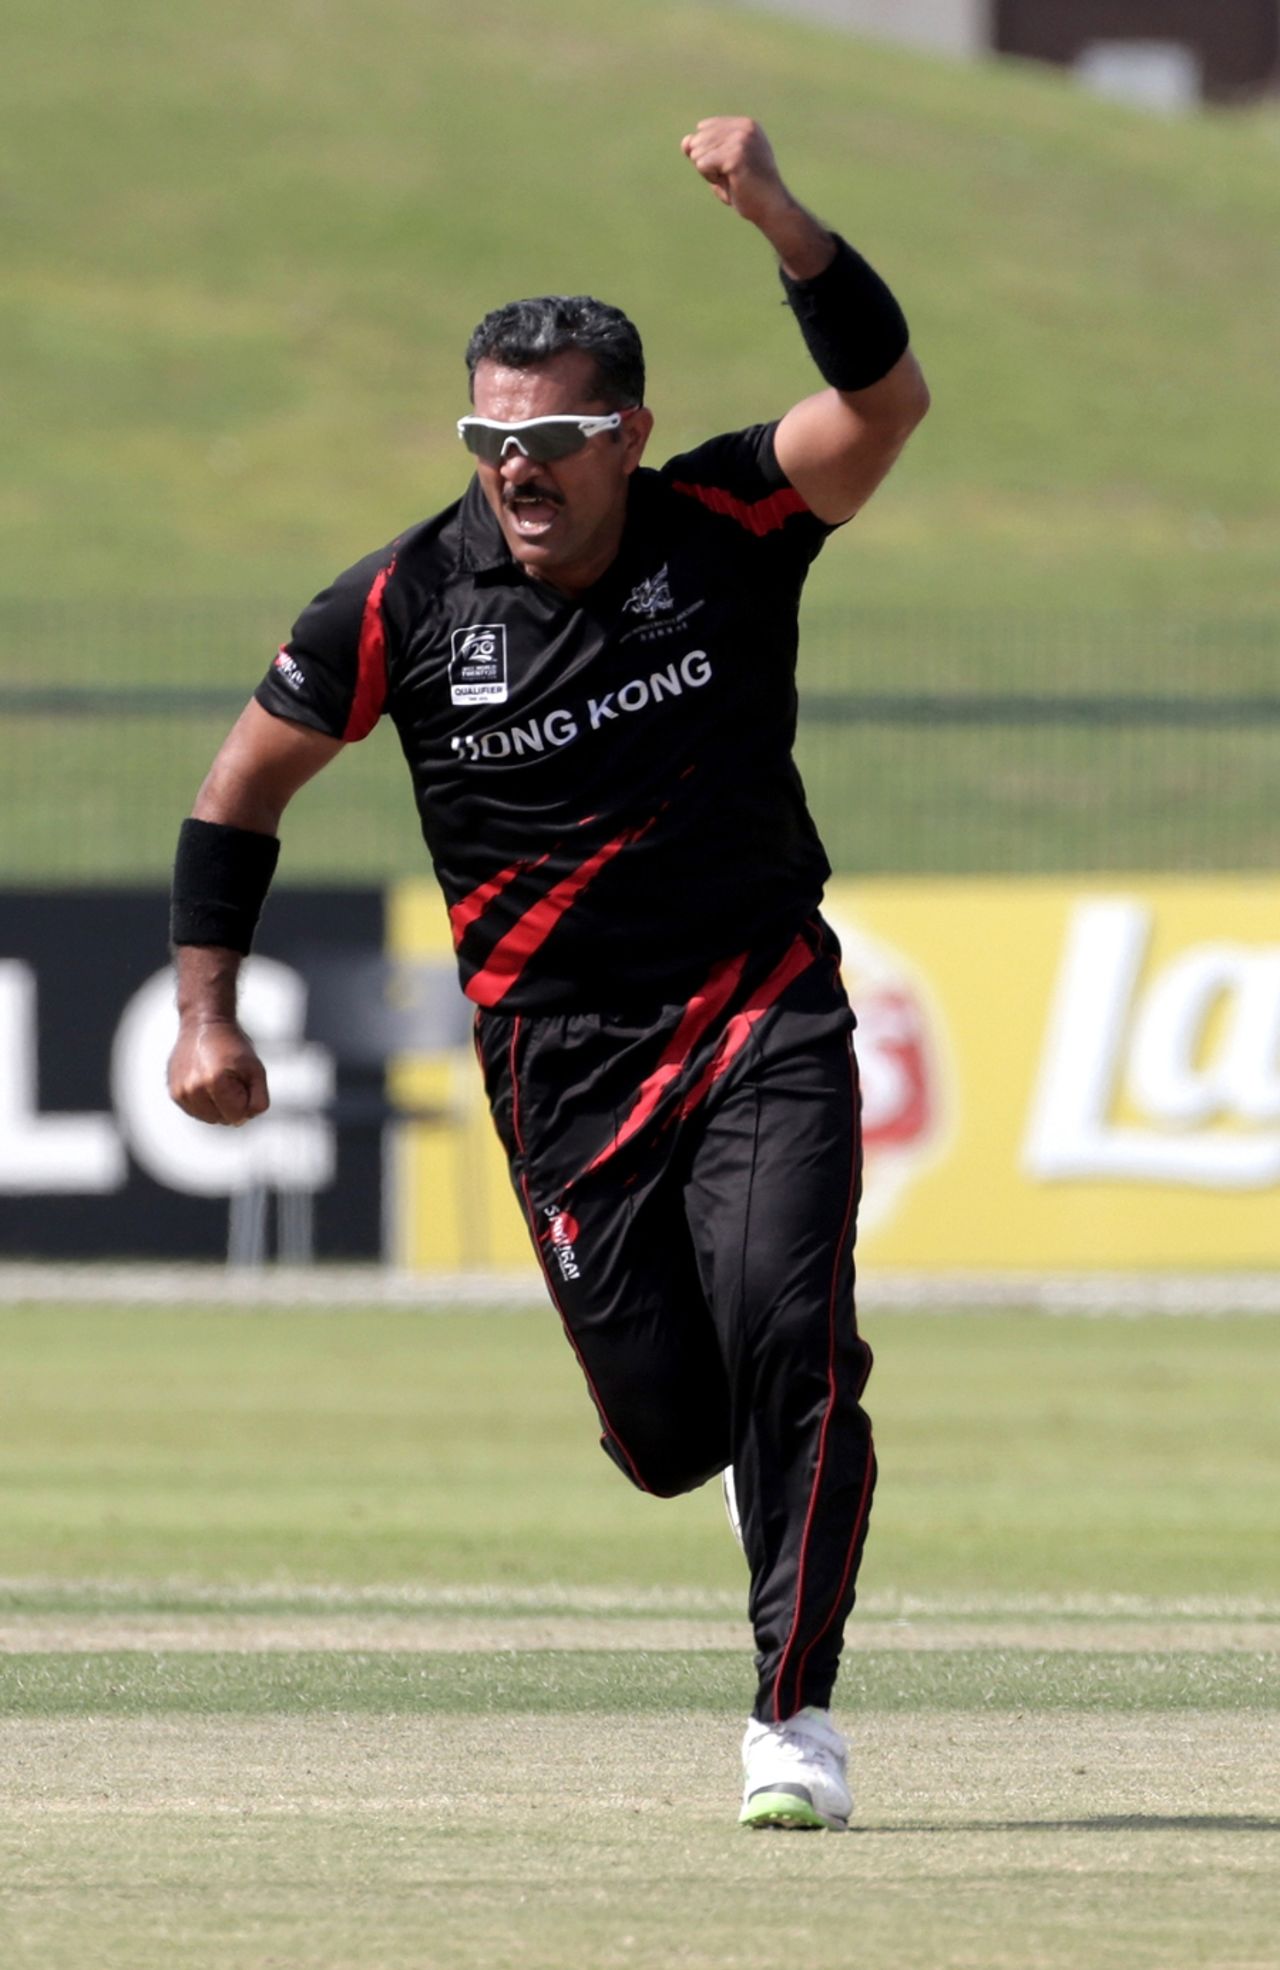 Moner Ahmed of Hong Kong celebrates a catch off his own bowling during the Papua New Guinea v Hong Kong Qualifying Play-off match at the ICC World Twenty20 Qualifiers at the Zayed Cricket Stadium on November 28, 2013 in Abu Dhabi, United Arab Emirates. (Photo by Graham Crouch-IDI/IDI via Getty Images)